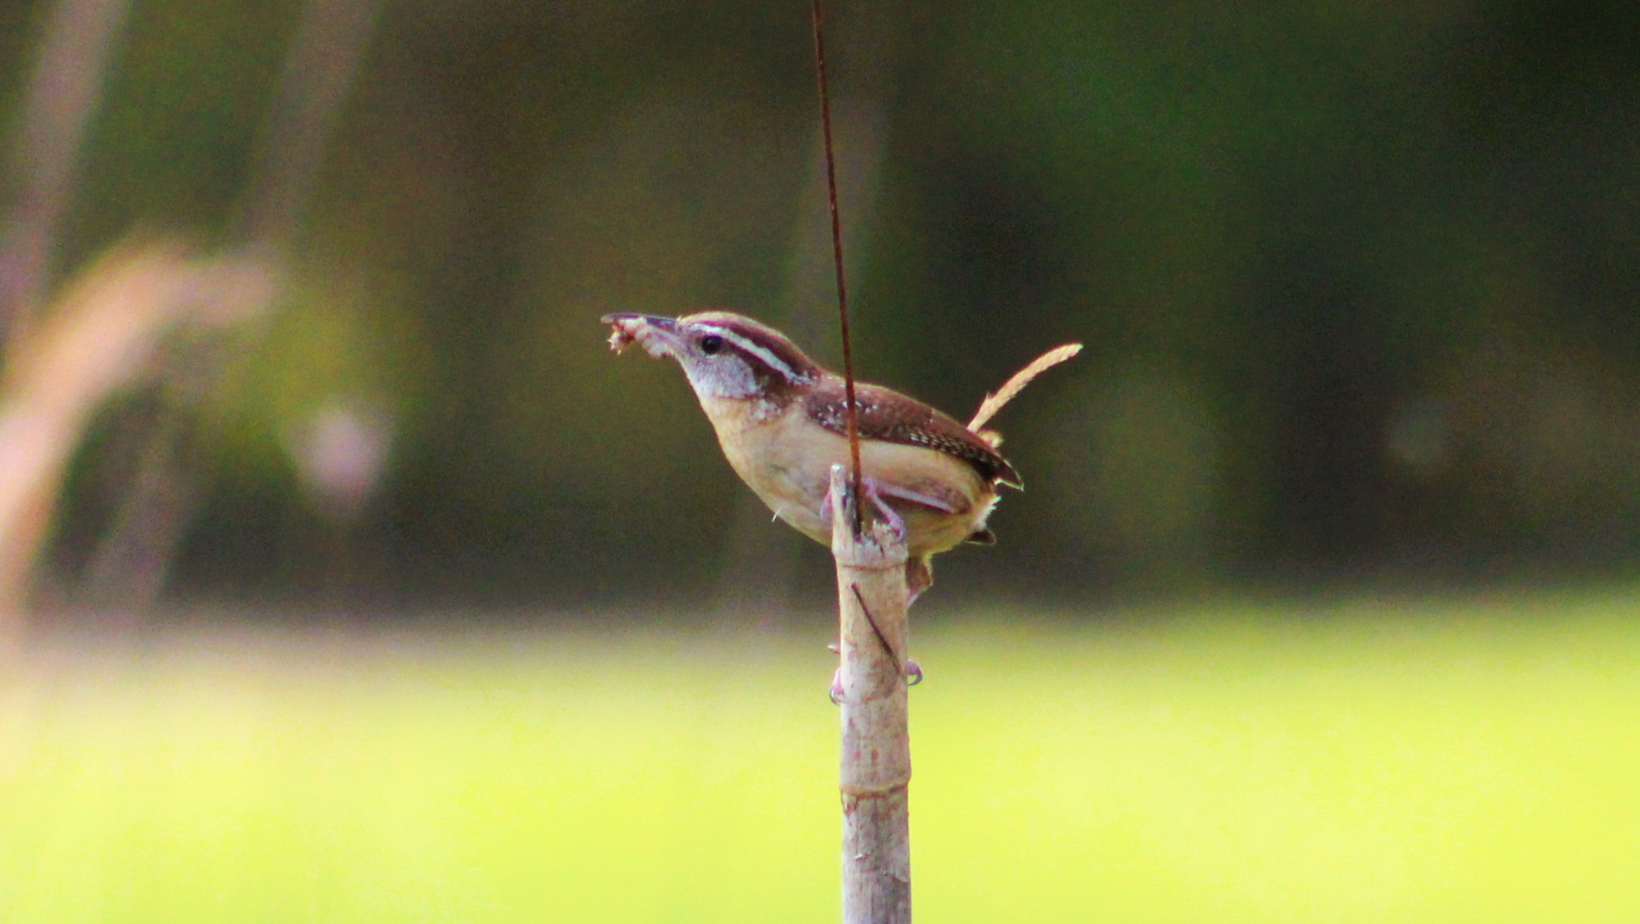 Carolina Wren with a bug in our front yard - nature observation